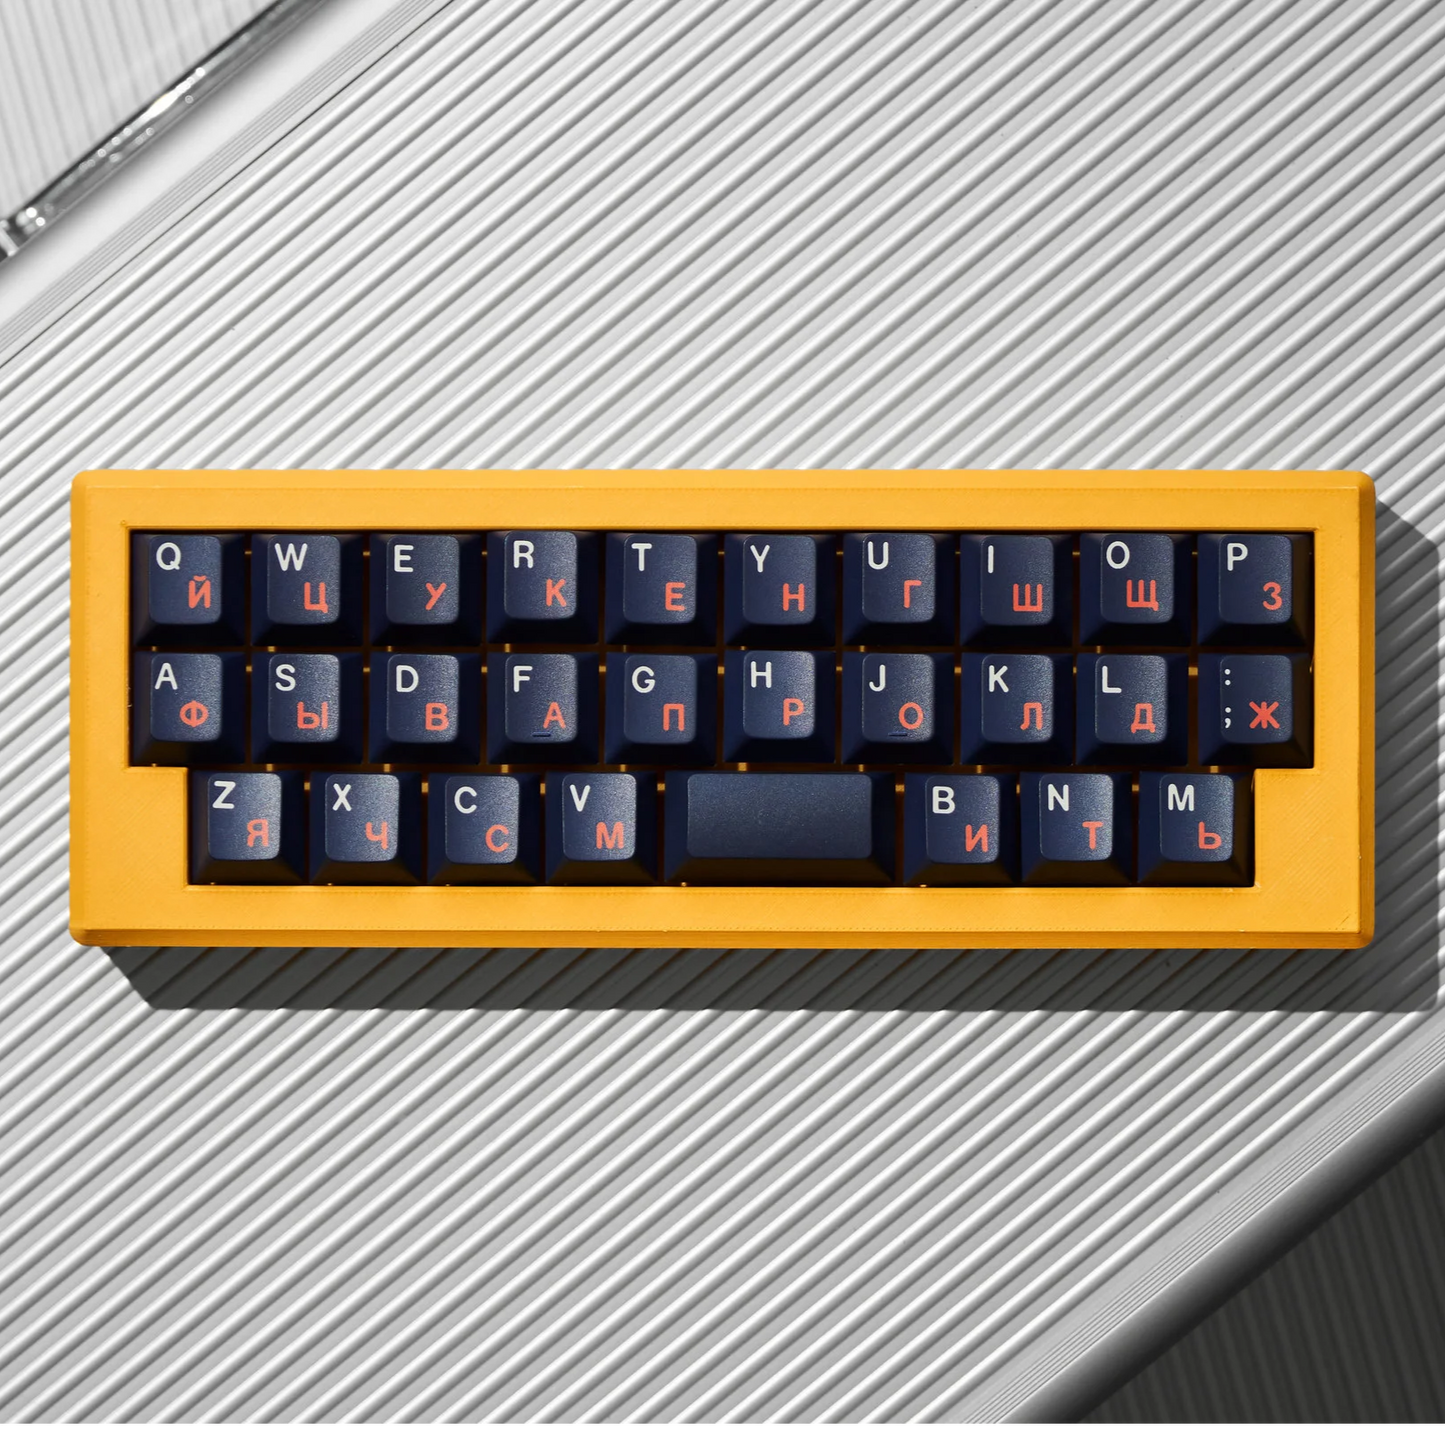 [EXTRA] FAST BLUE CHERRY PBT KEYCAP SET (FREE SHIPPING TO SOME COUNTRIES)